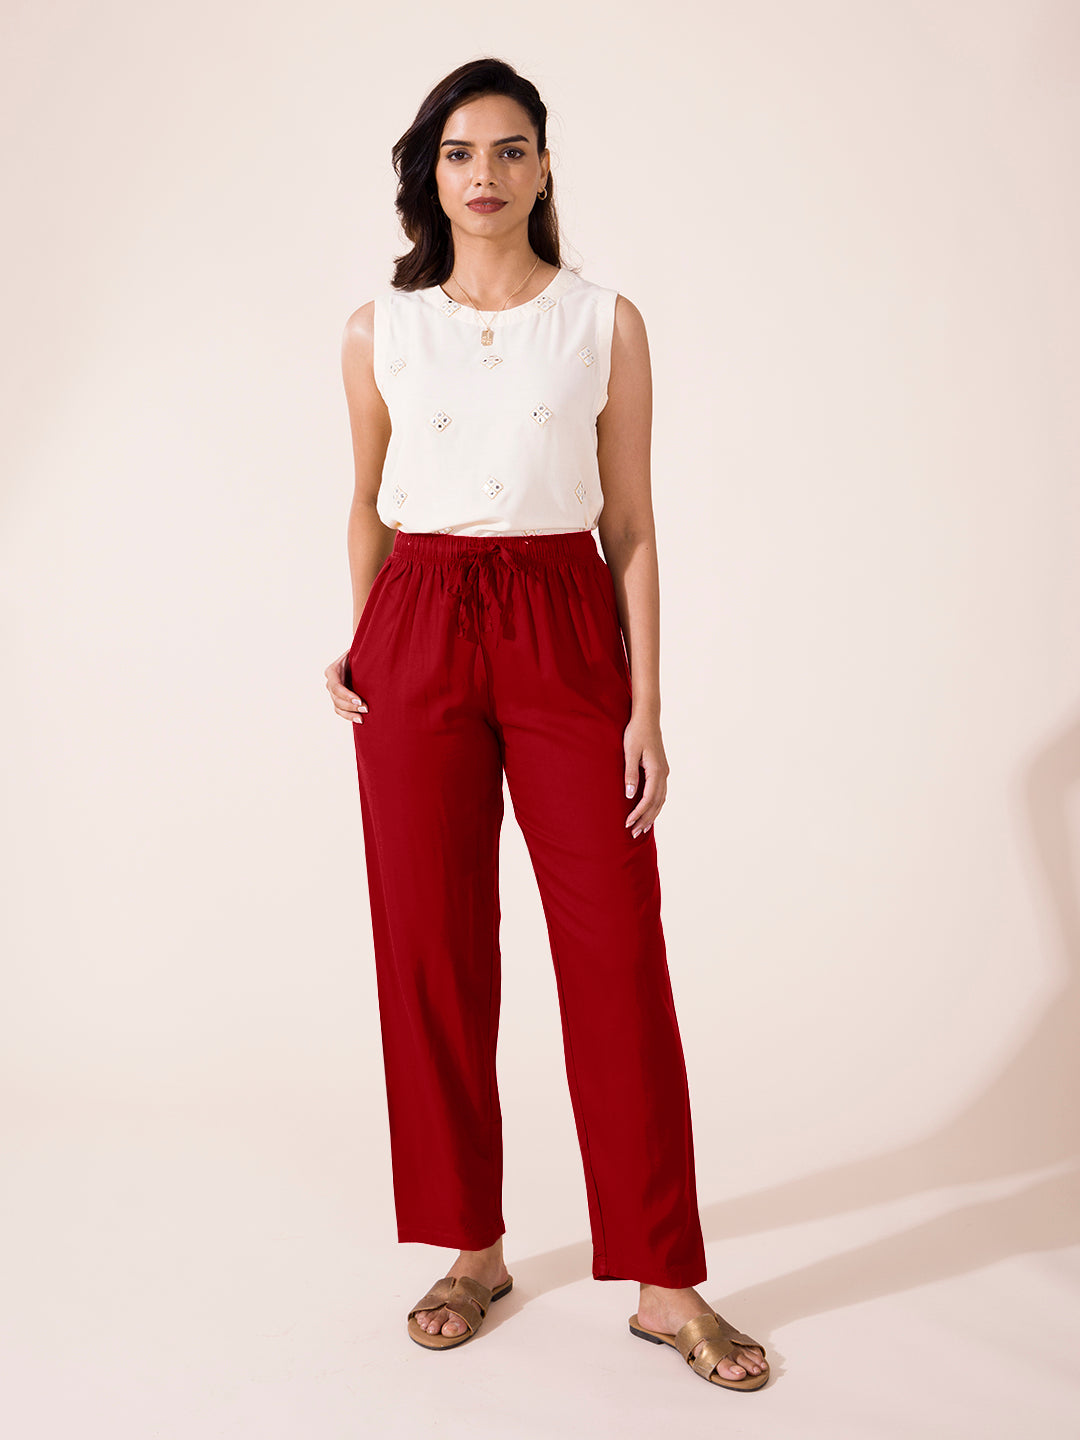 Buy GO COLORS Women Solid Dark Wine Stretch Ponte Pants at Amazon.in